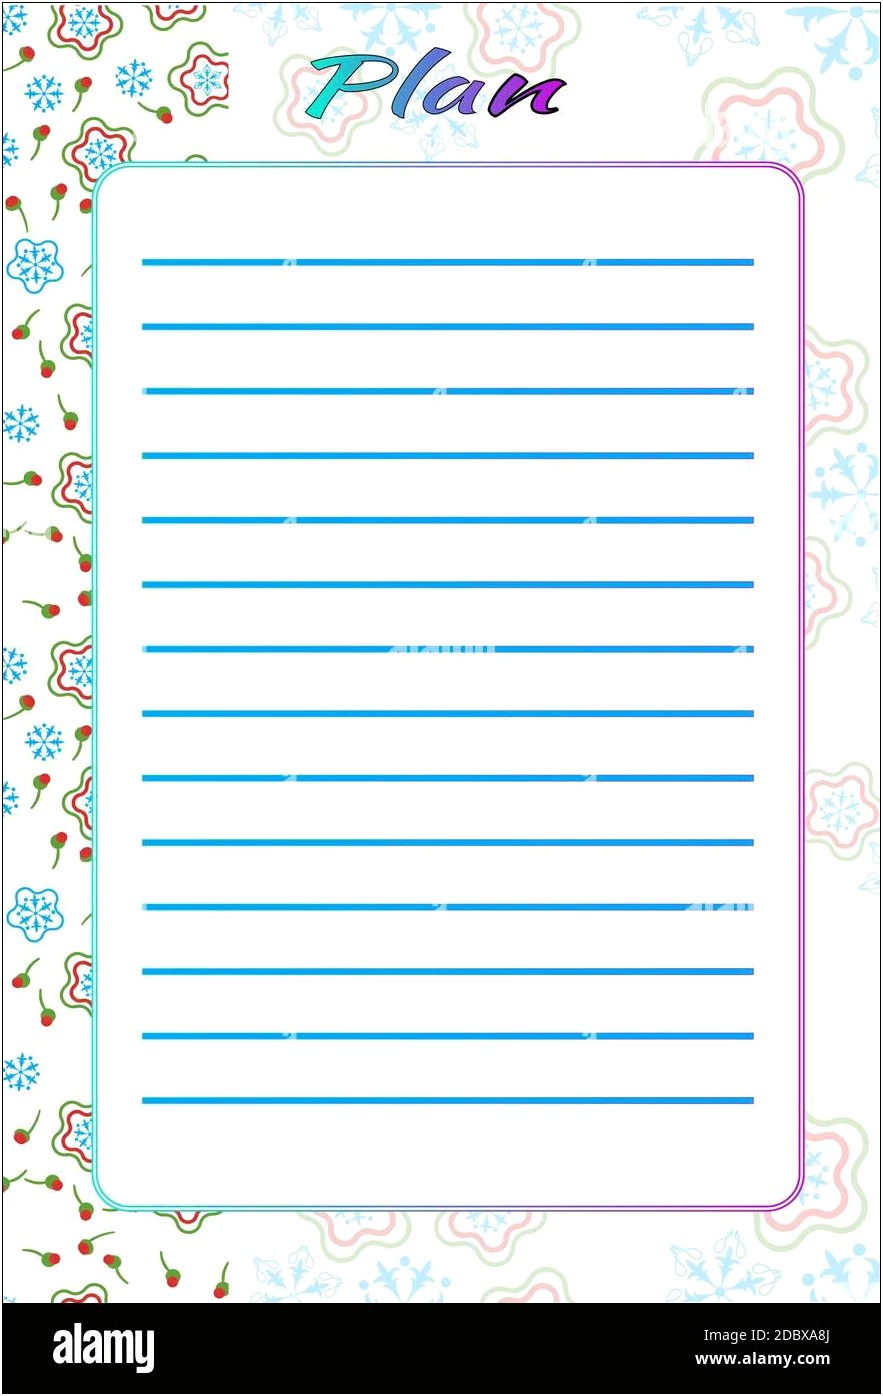 Microsoft Word Free Flowers Letter Template